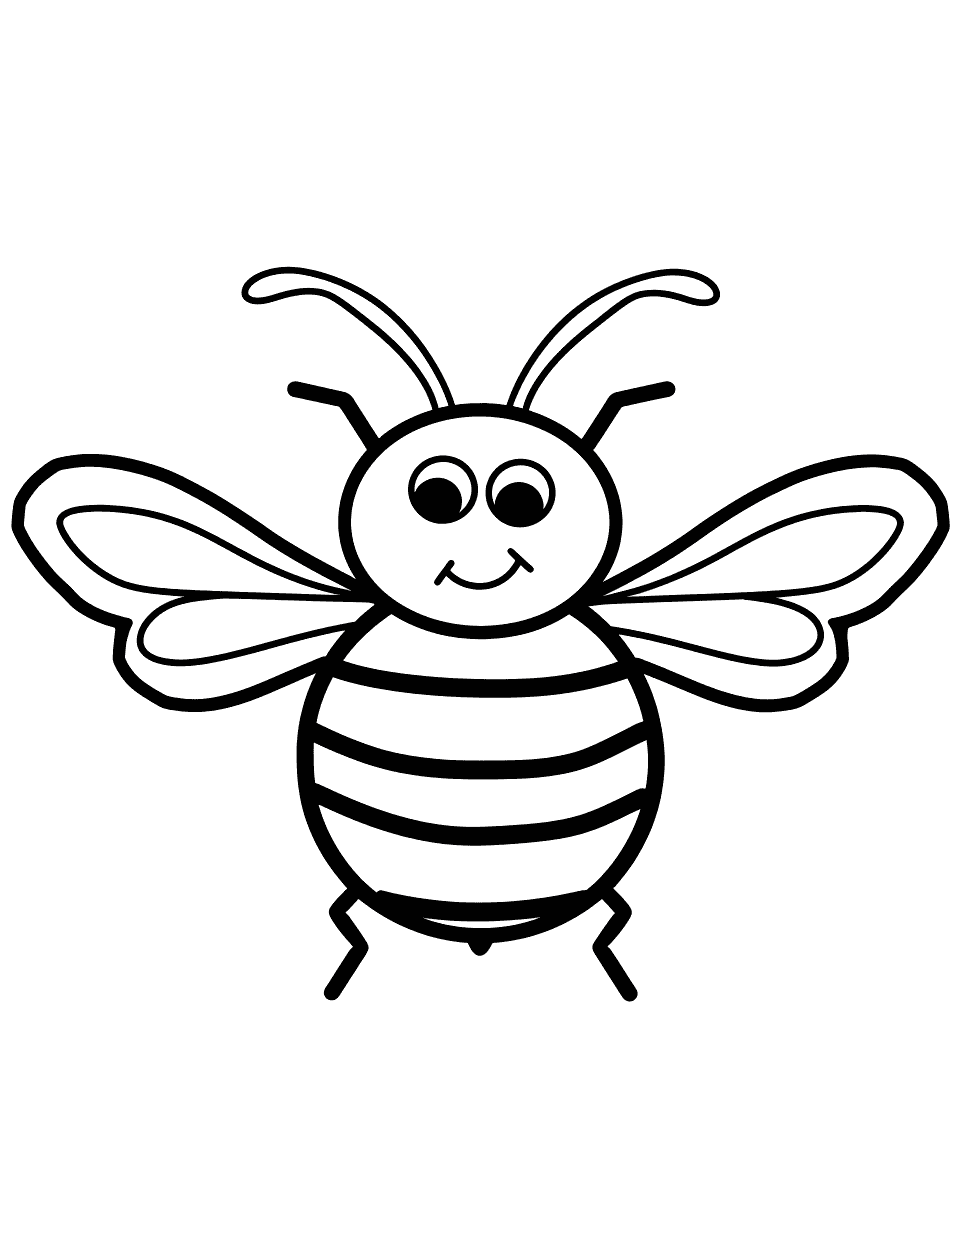 Simple Bee Outline Coloring Page - A simple, large outline of a bee for young kids to color.